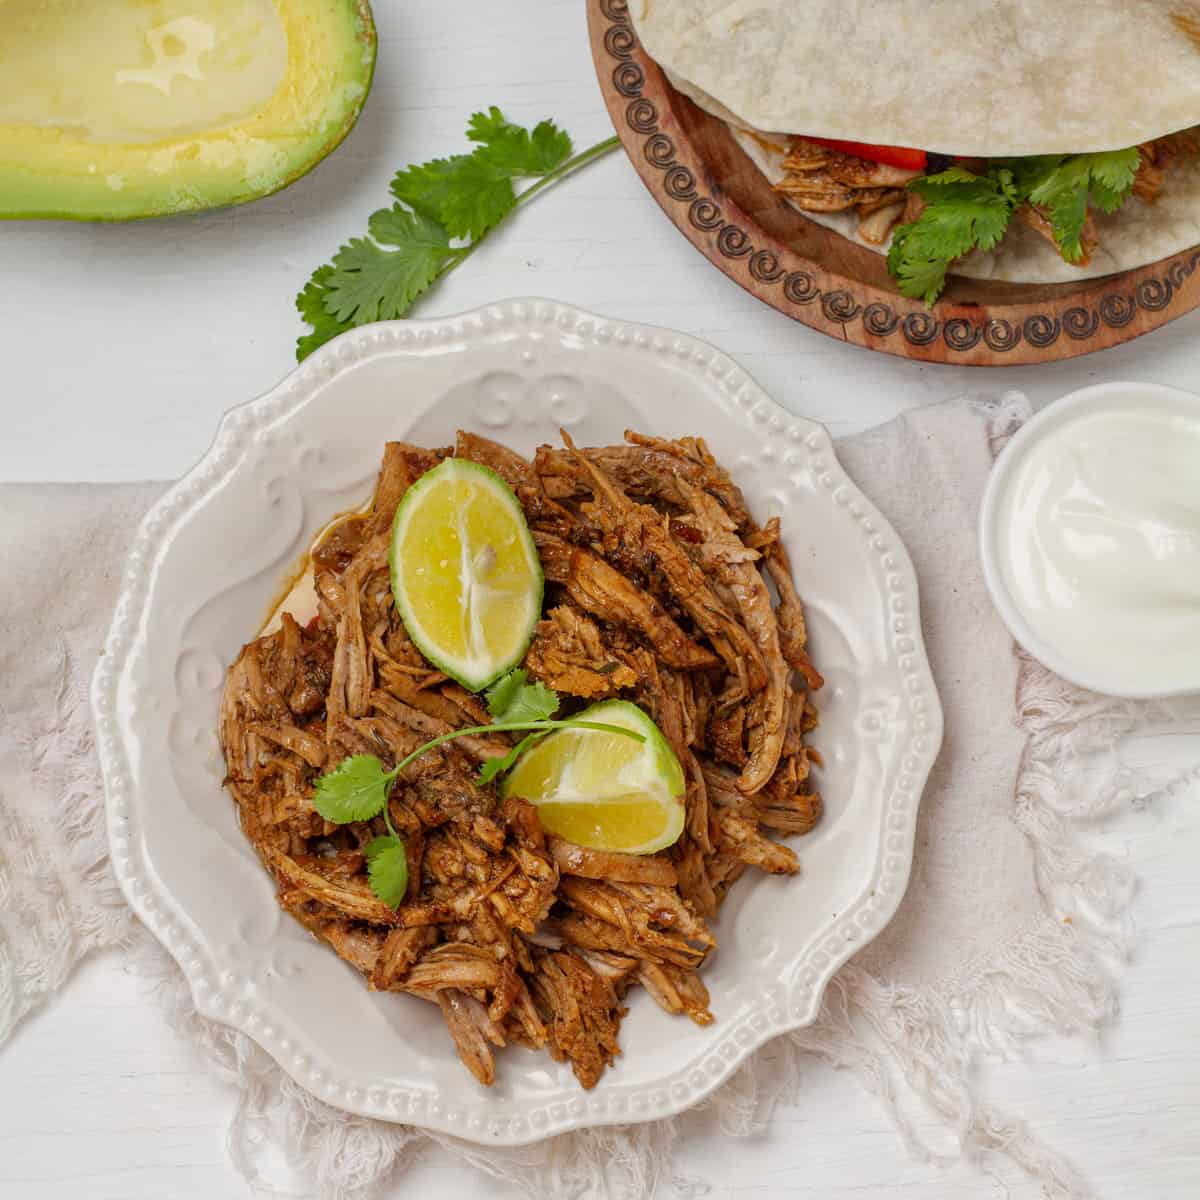 Carnitas platted with lemon slice and avocados